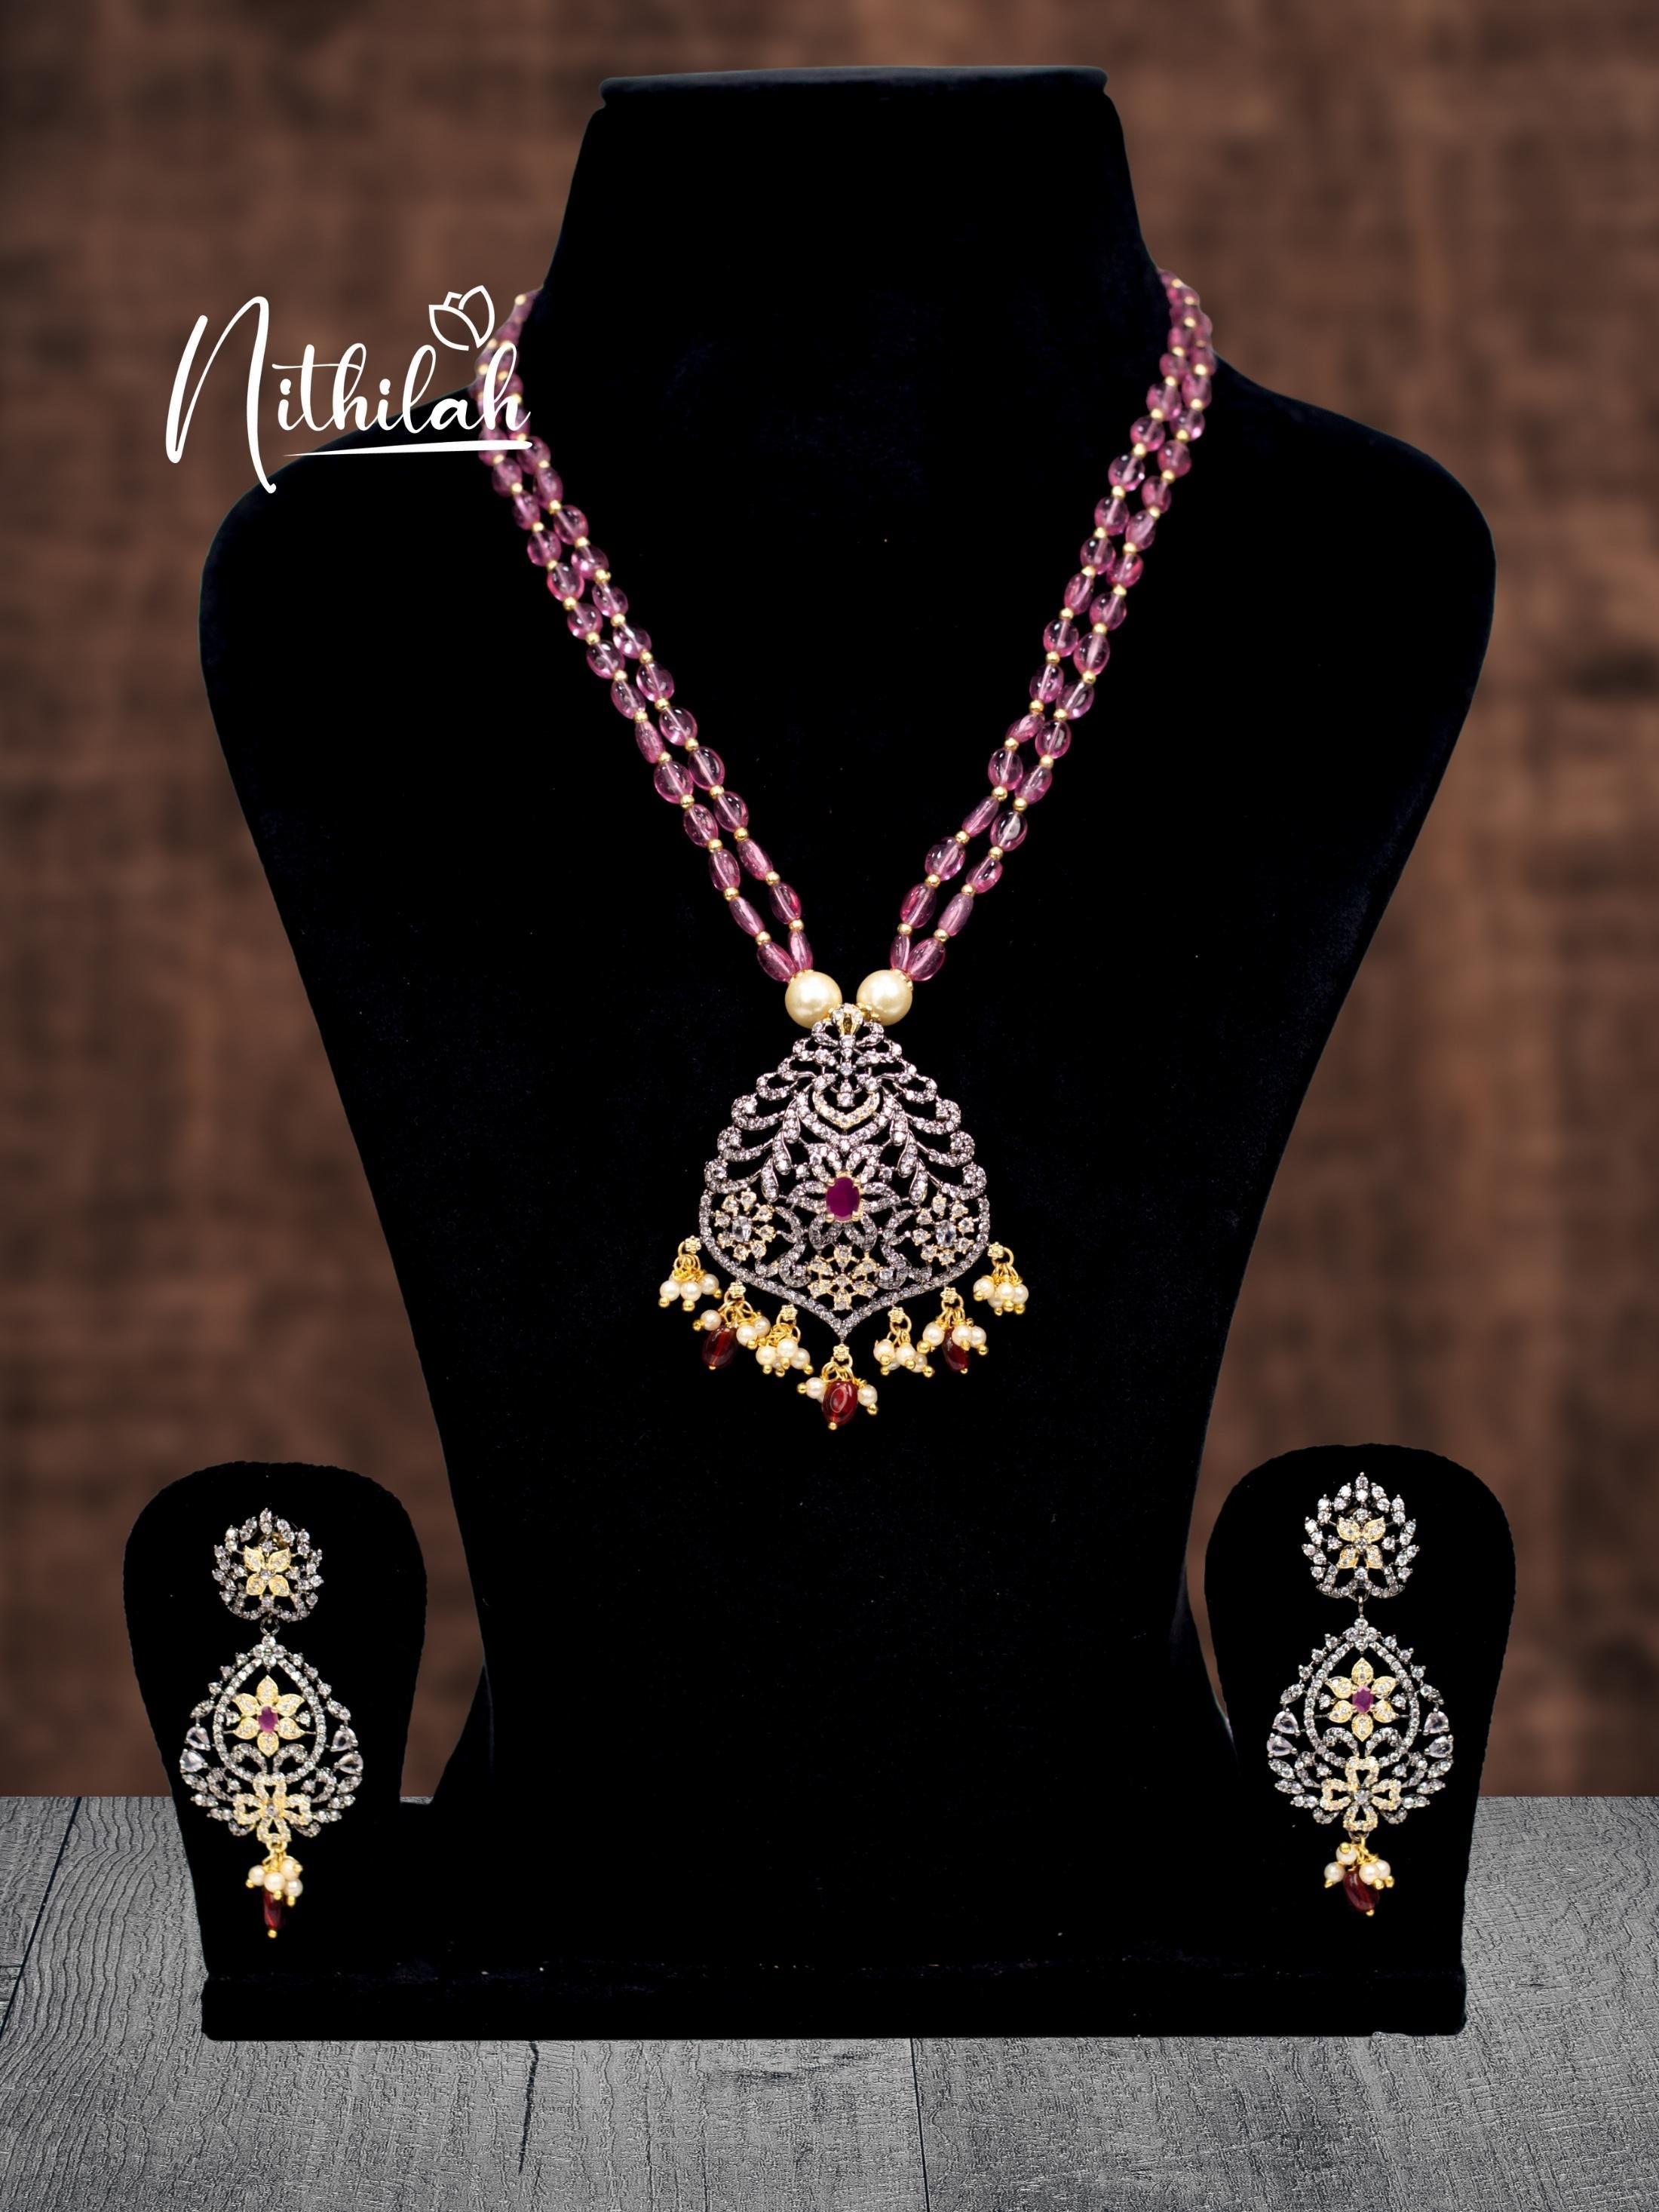 Buy Imitation Jewellery Pink Mosanite Beads Victorian Necklace 3 NCPN114 Online